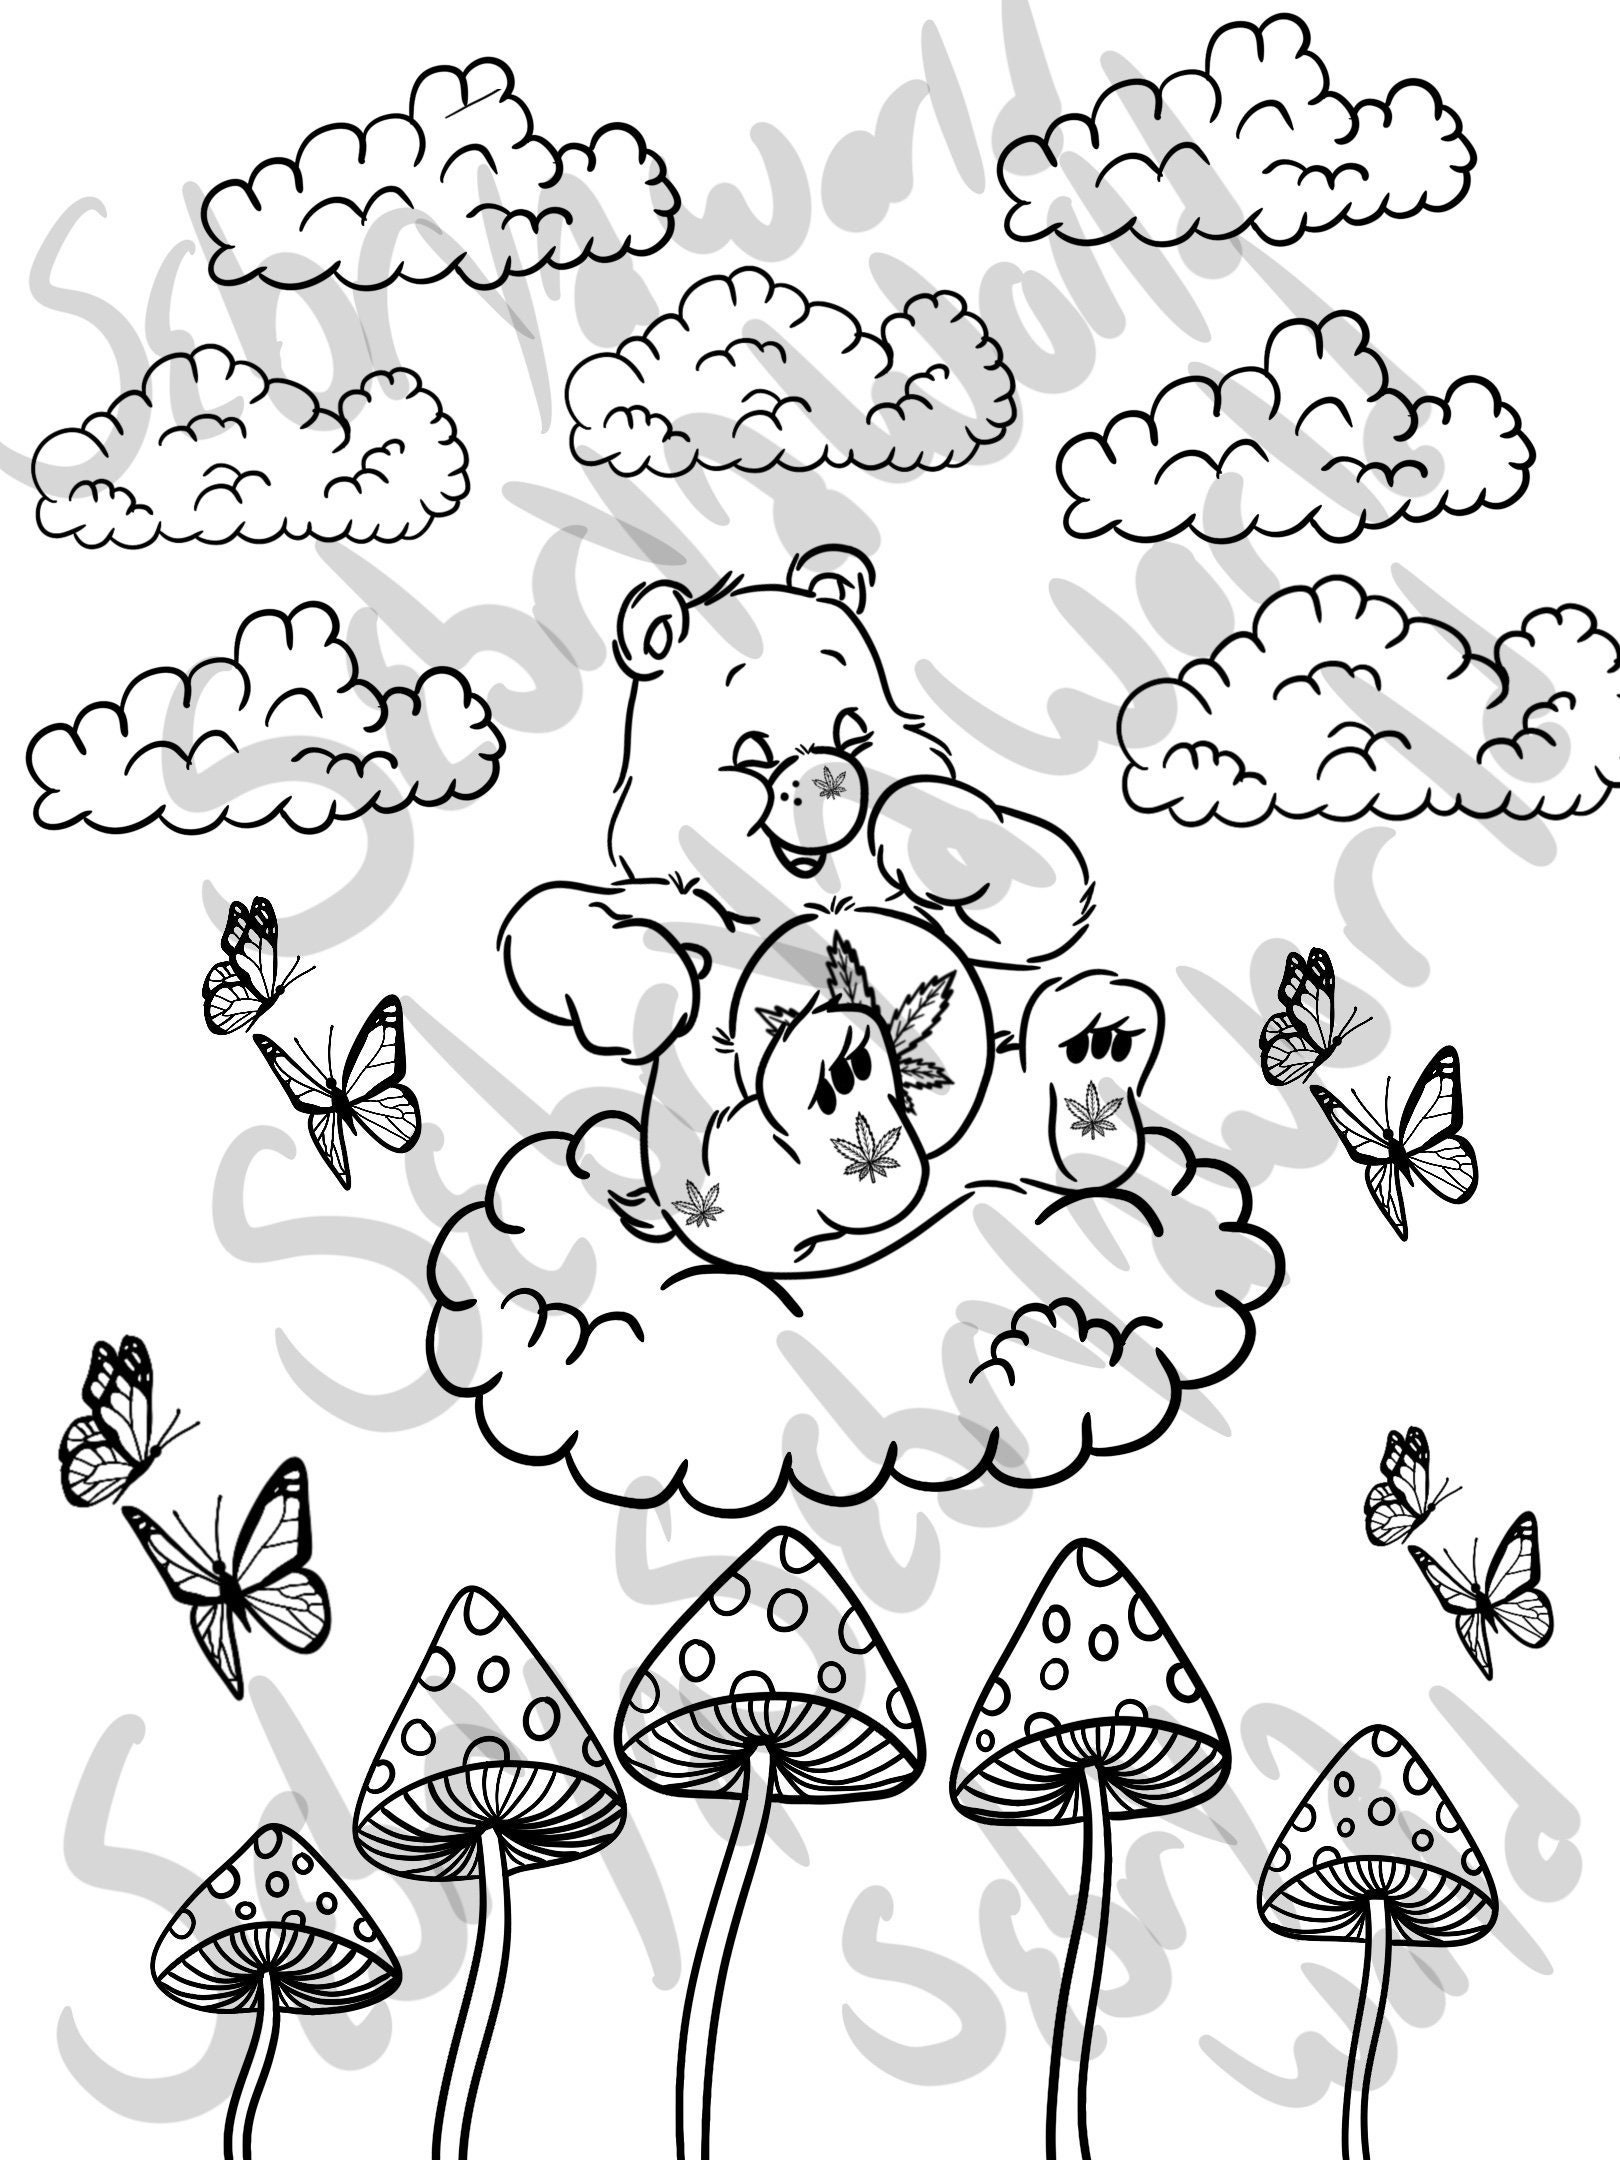 People Smoking Cigarettes Coloring Pages